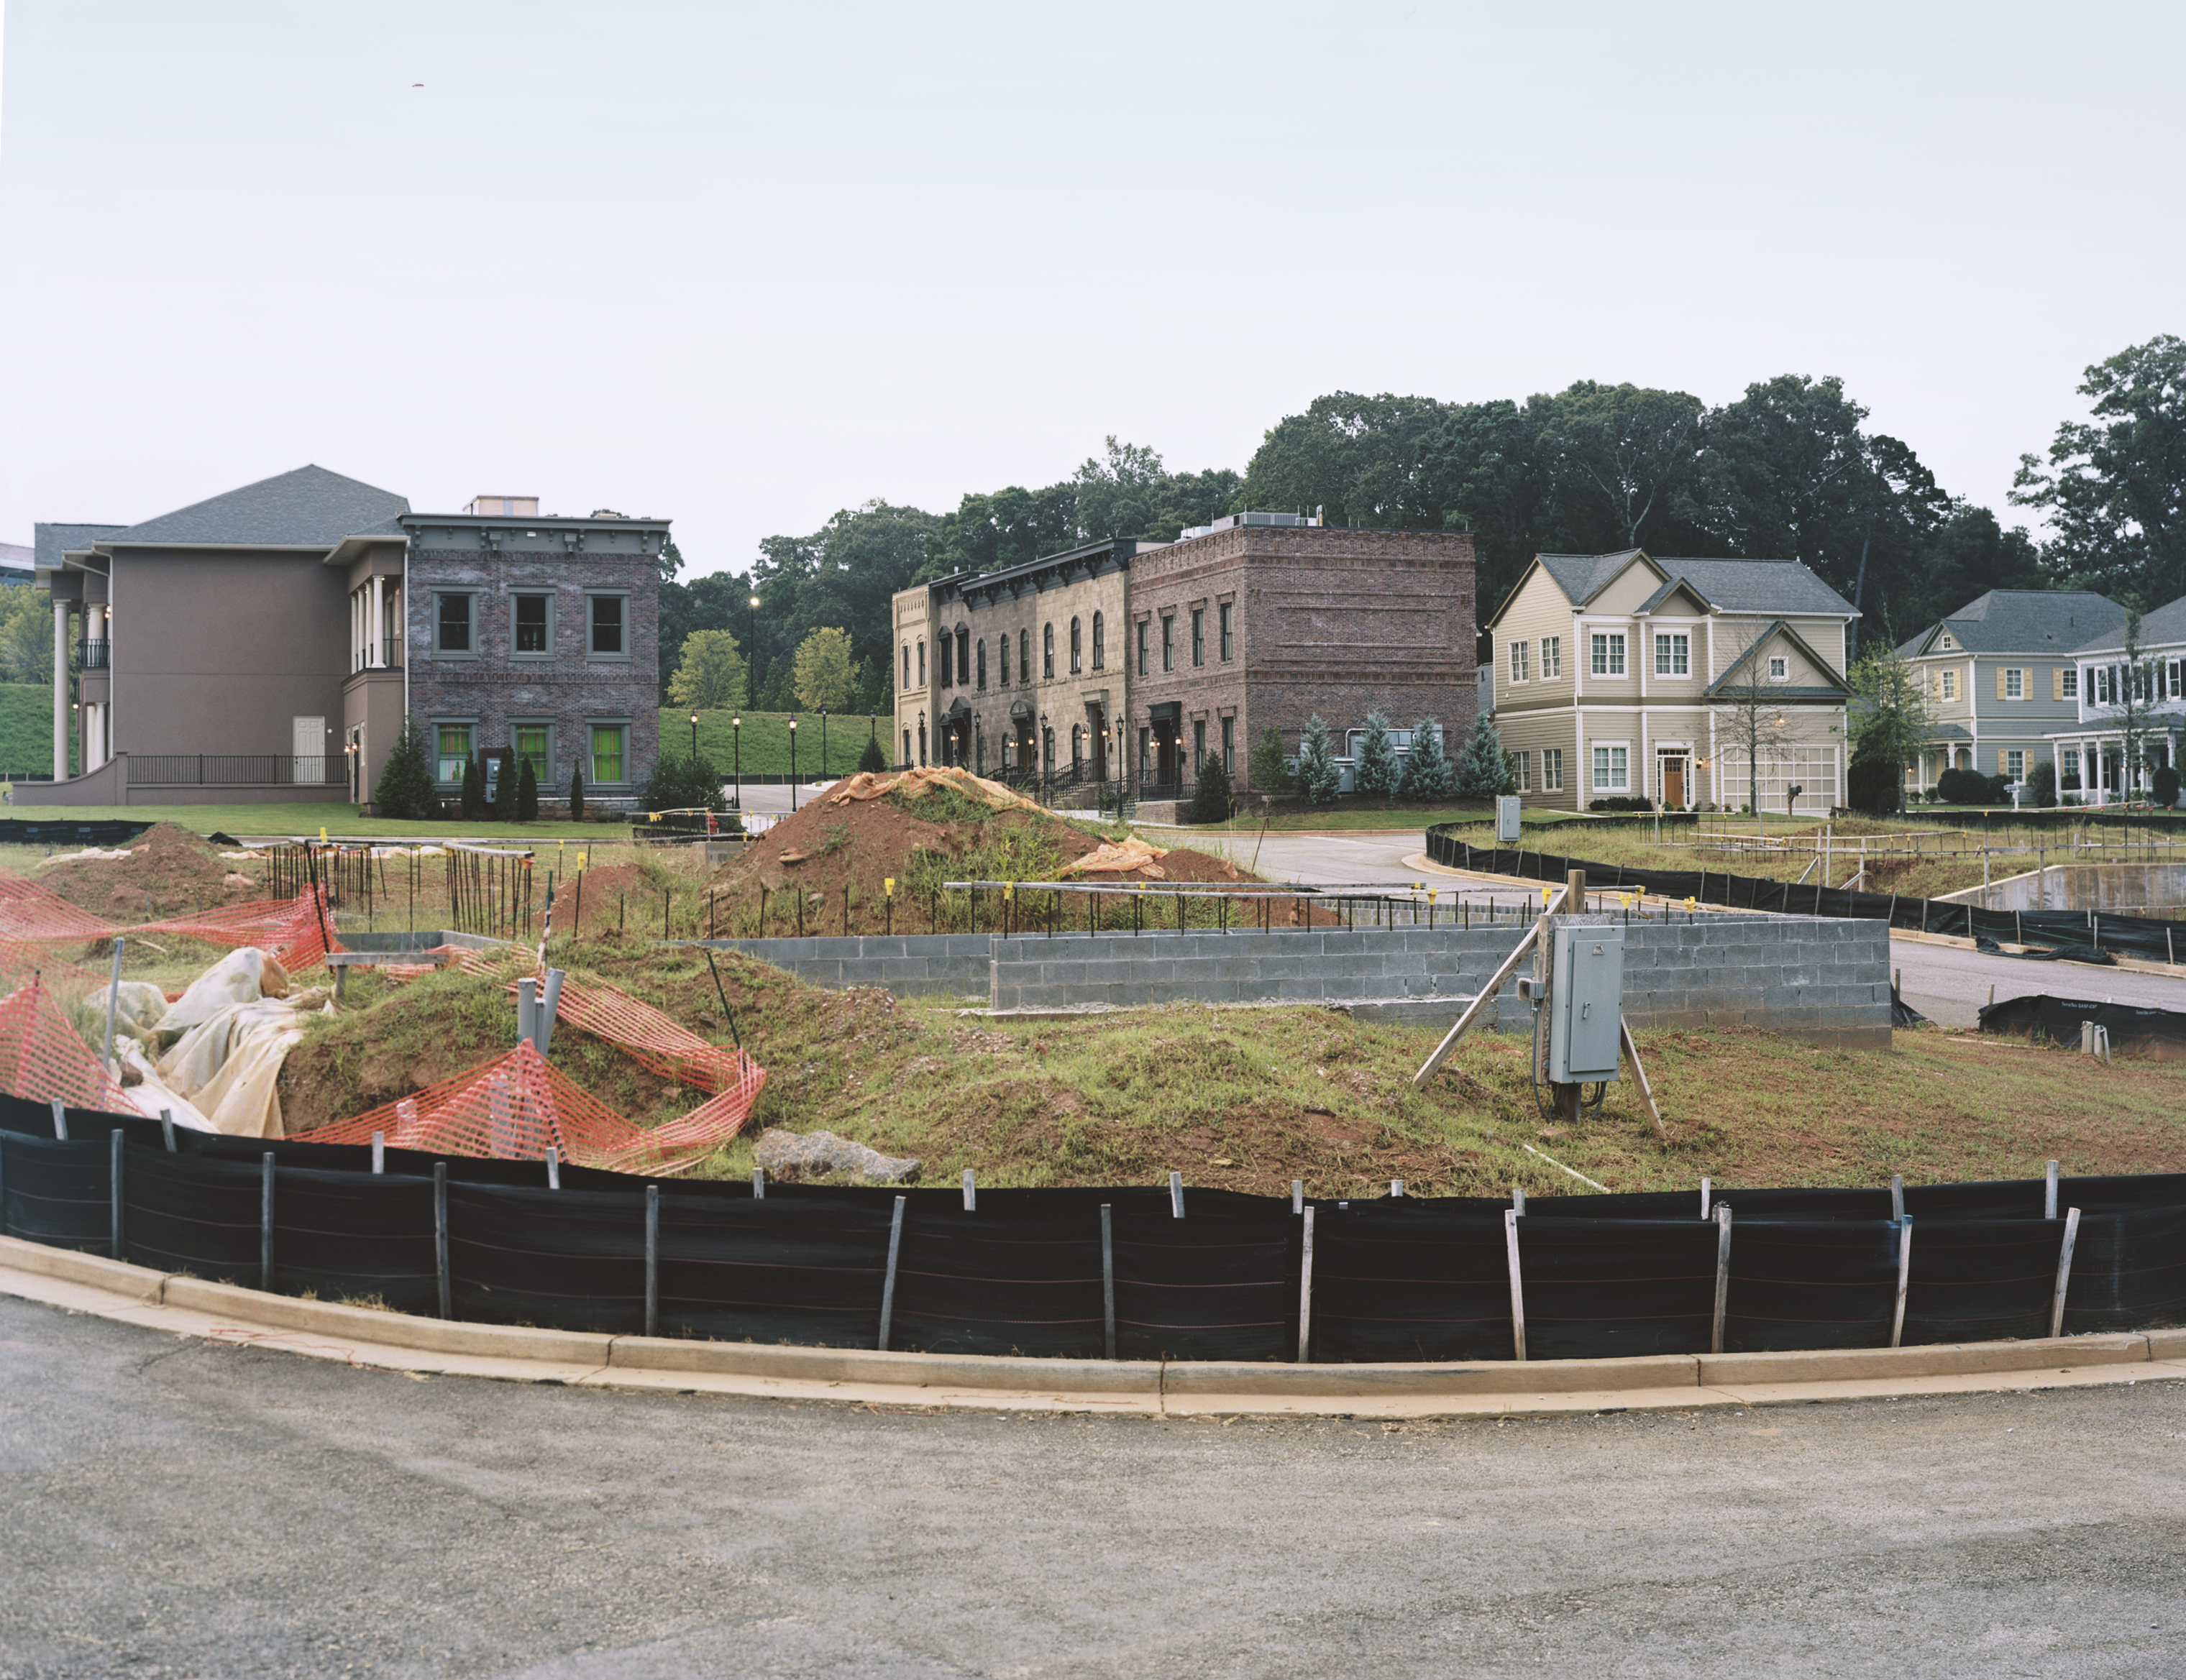 A view of "Maxineville," named in memory of Tyler Perry's mother Maxine is part of an extensive backlot at Tyler Perry Studios, parts of which are still under construction. The studio will be fully complete in 2019. Situated on 330 acres of historic property on the decommissioned, Fort McPherson Army base. (RaMell Ross for TIME)